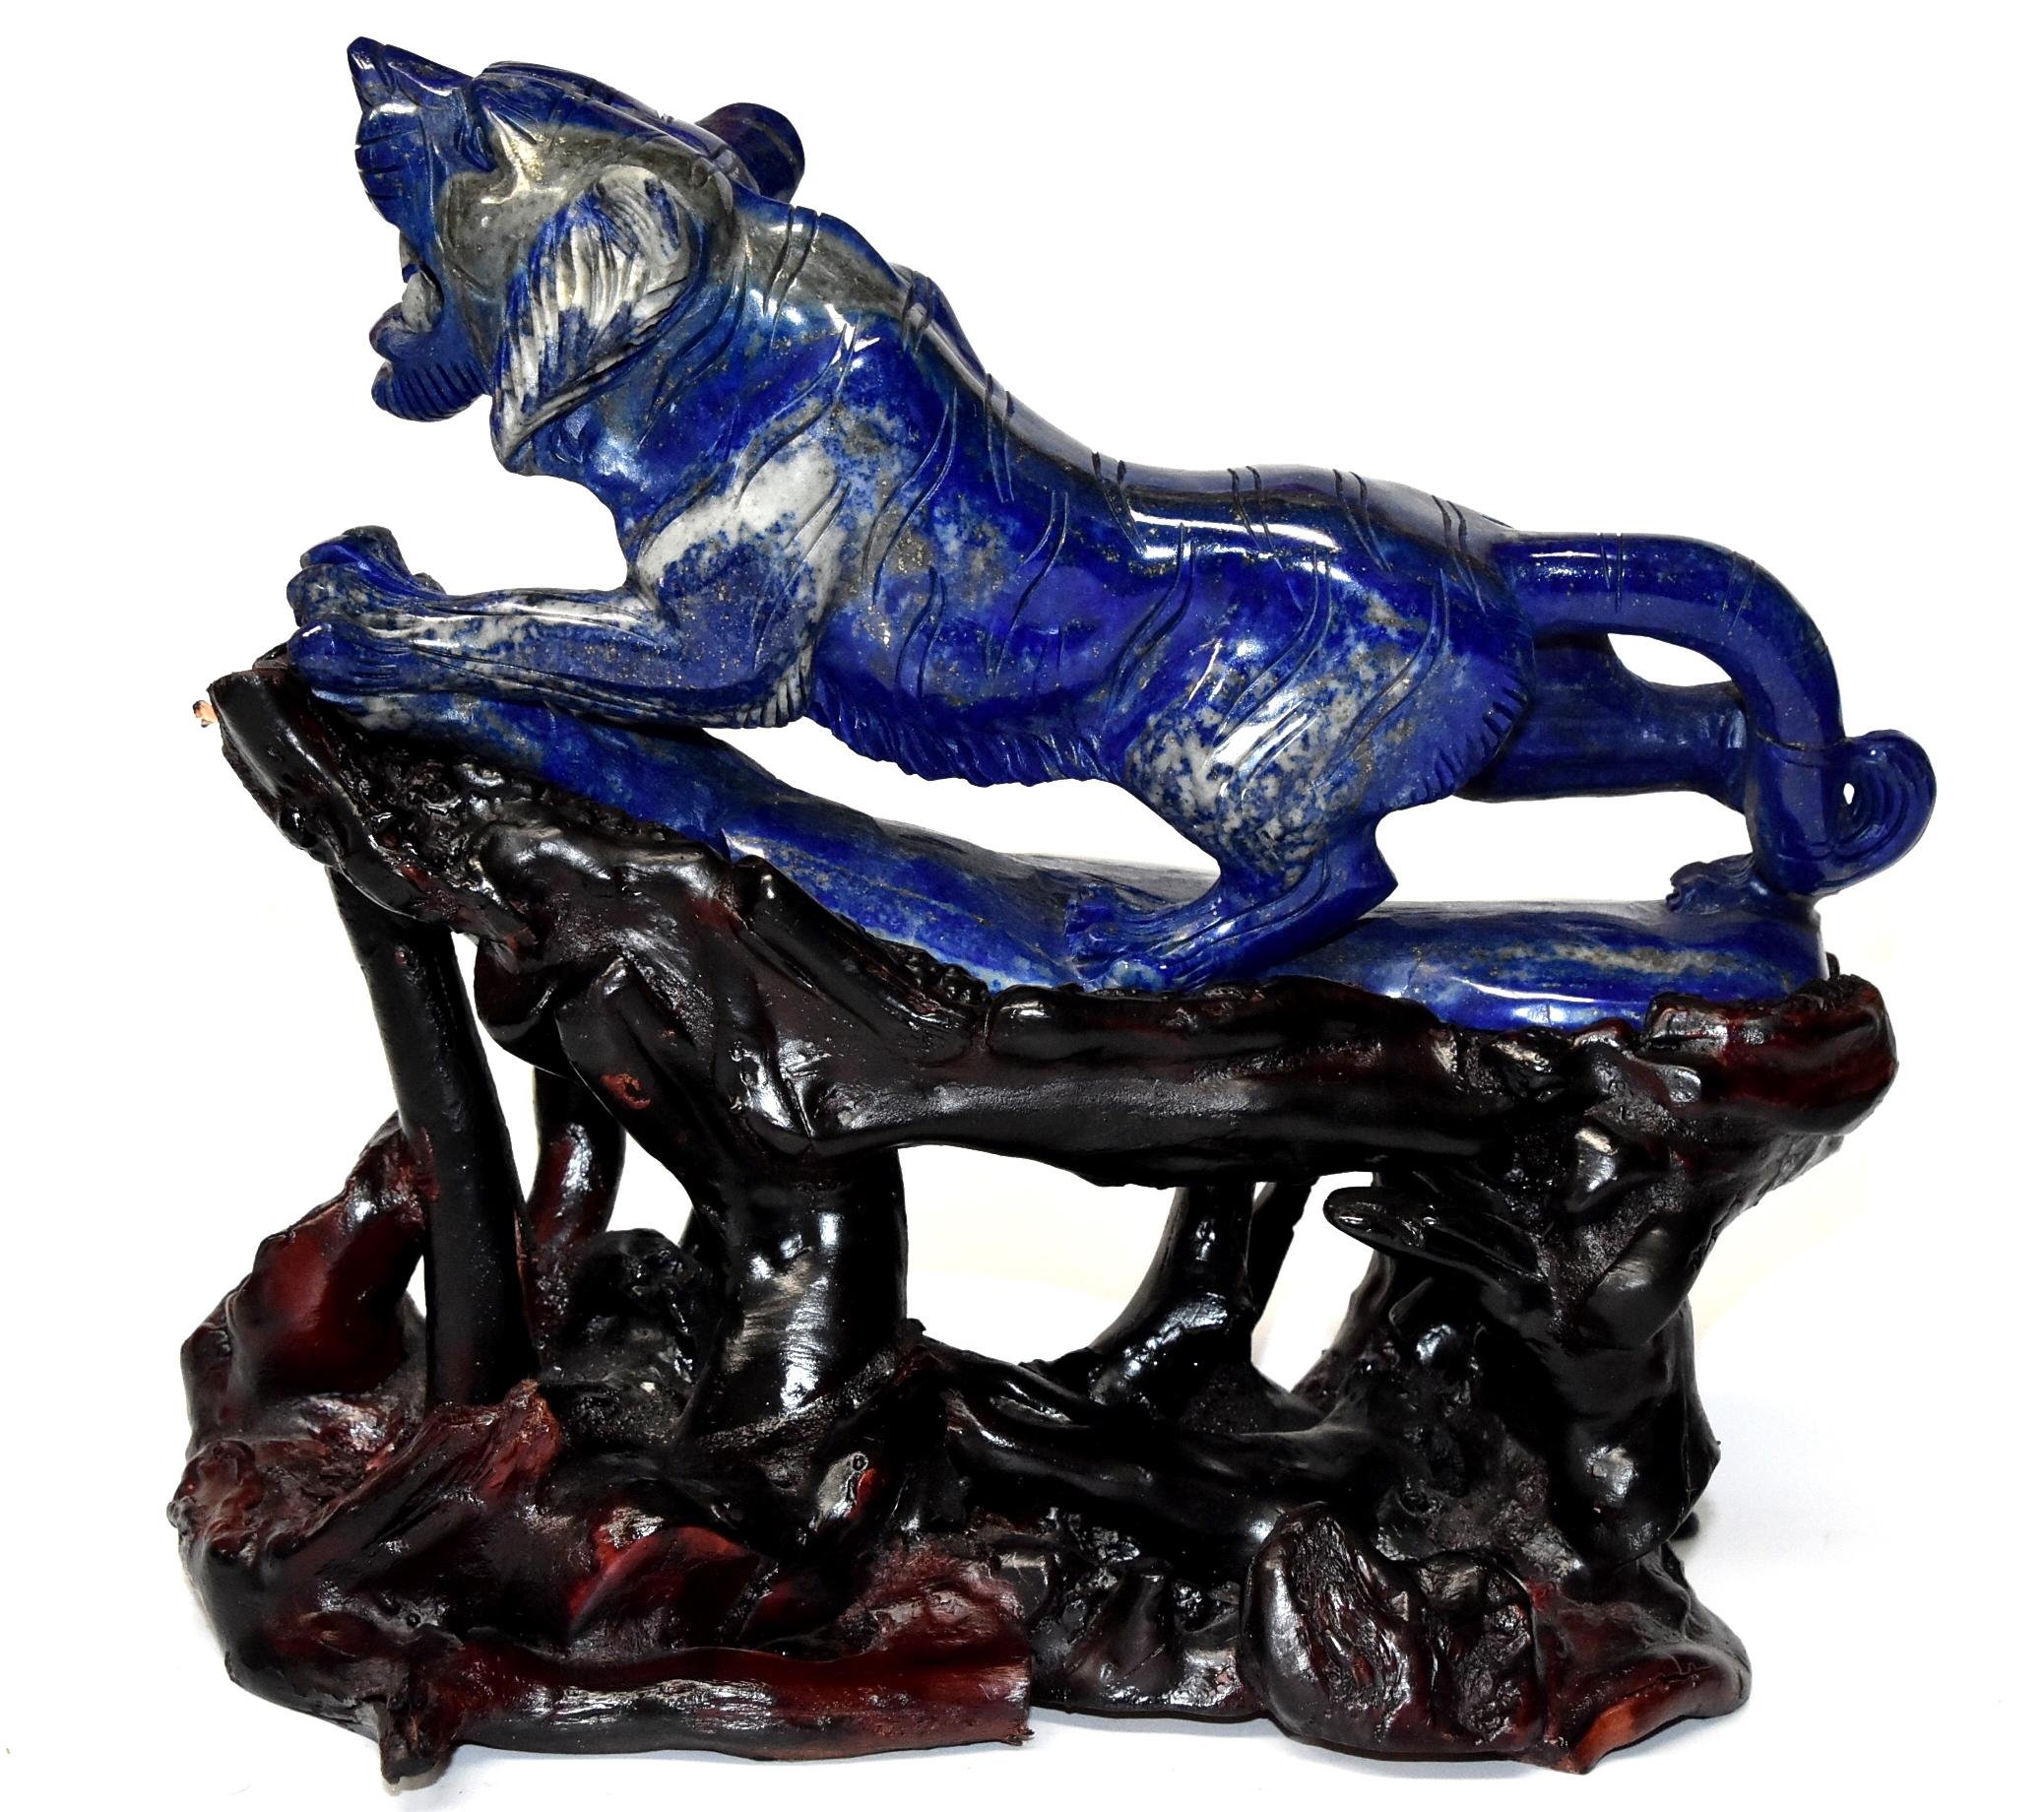 A beautiful all natural lapis lazuli tiger sculpture. The 2 lb stone's is violet blue with stunning glittering of gold, a contrast that creates a mesmerizing visual effect. Fantastic carving work shows off the tiger's muscles and paws. A fantastic